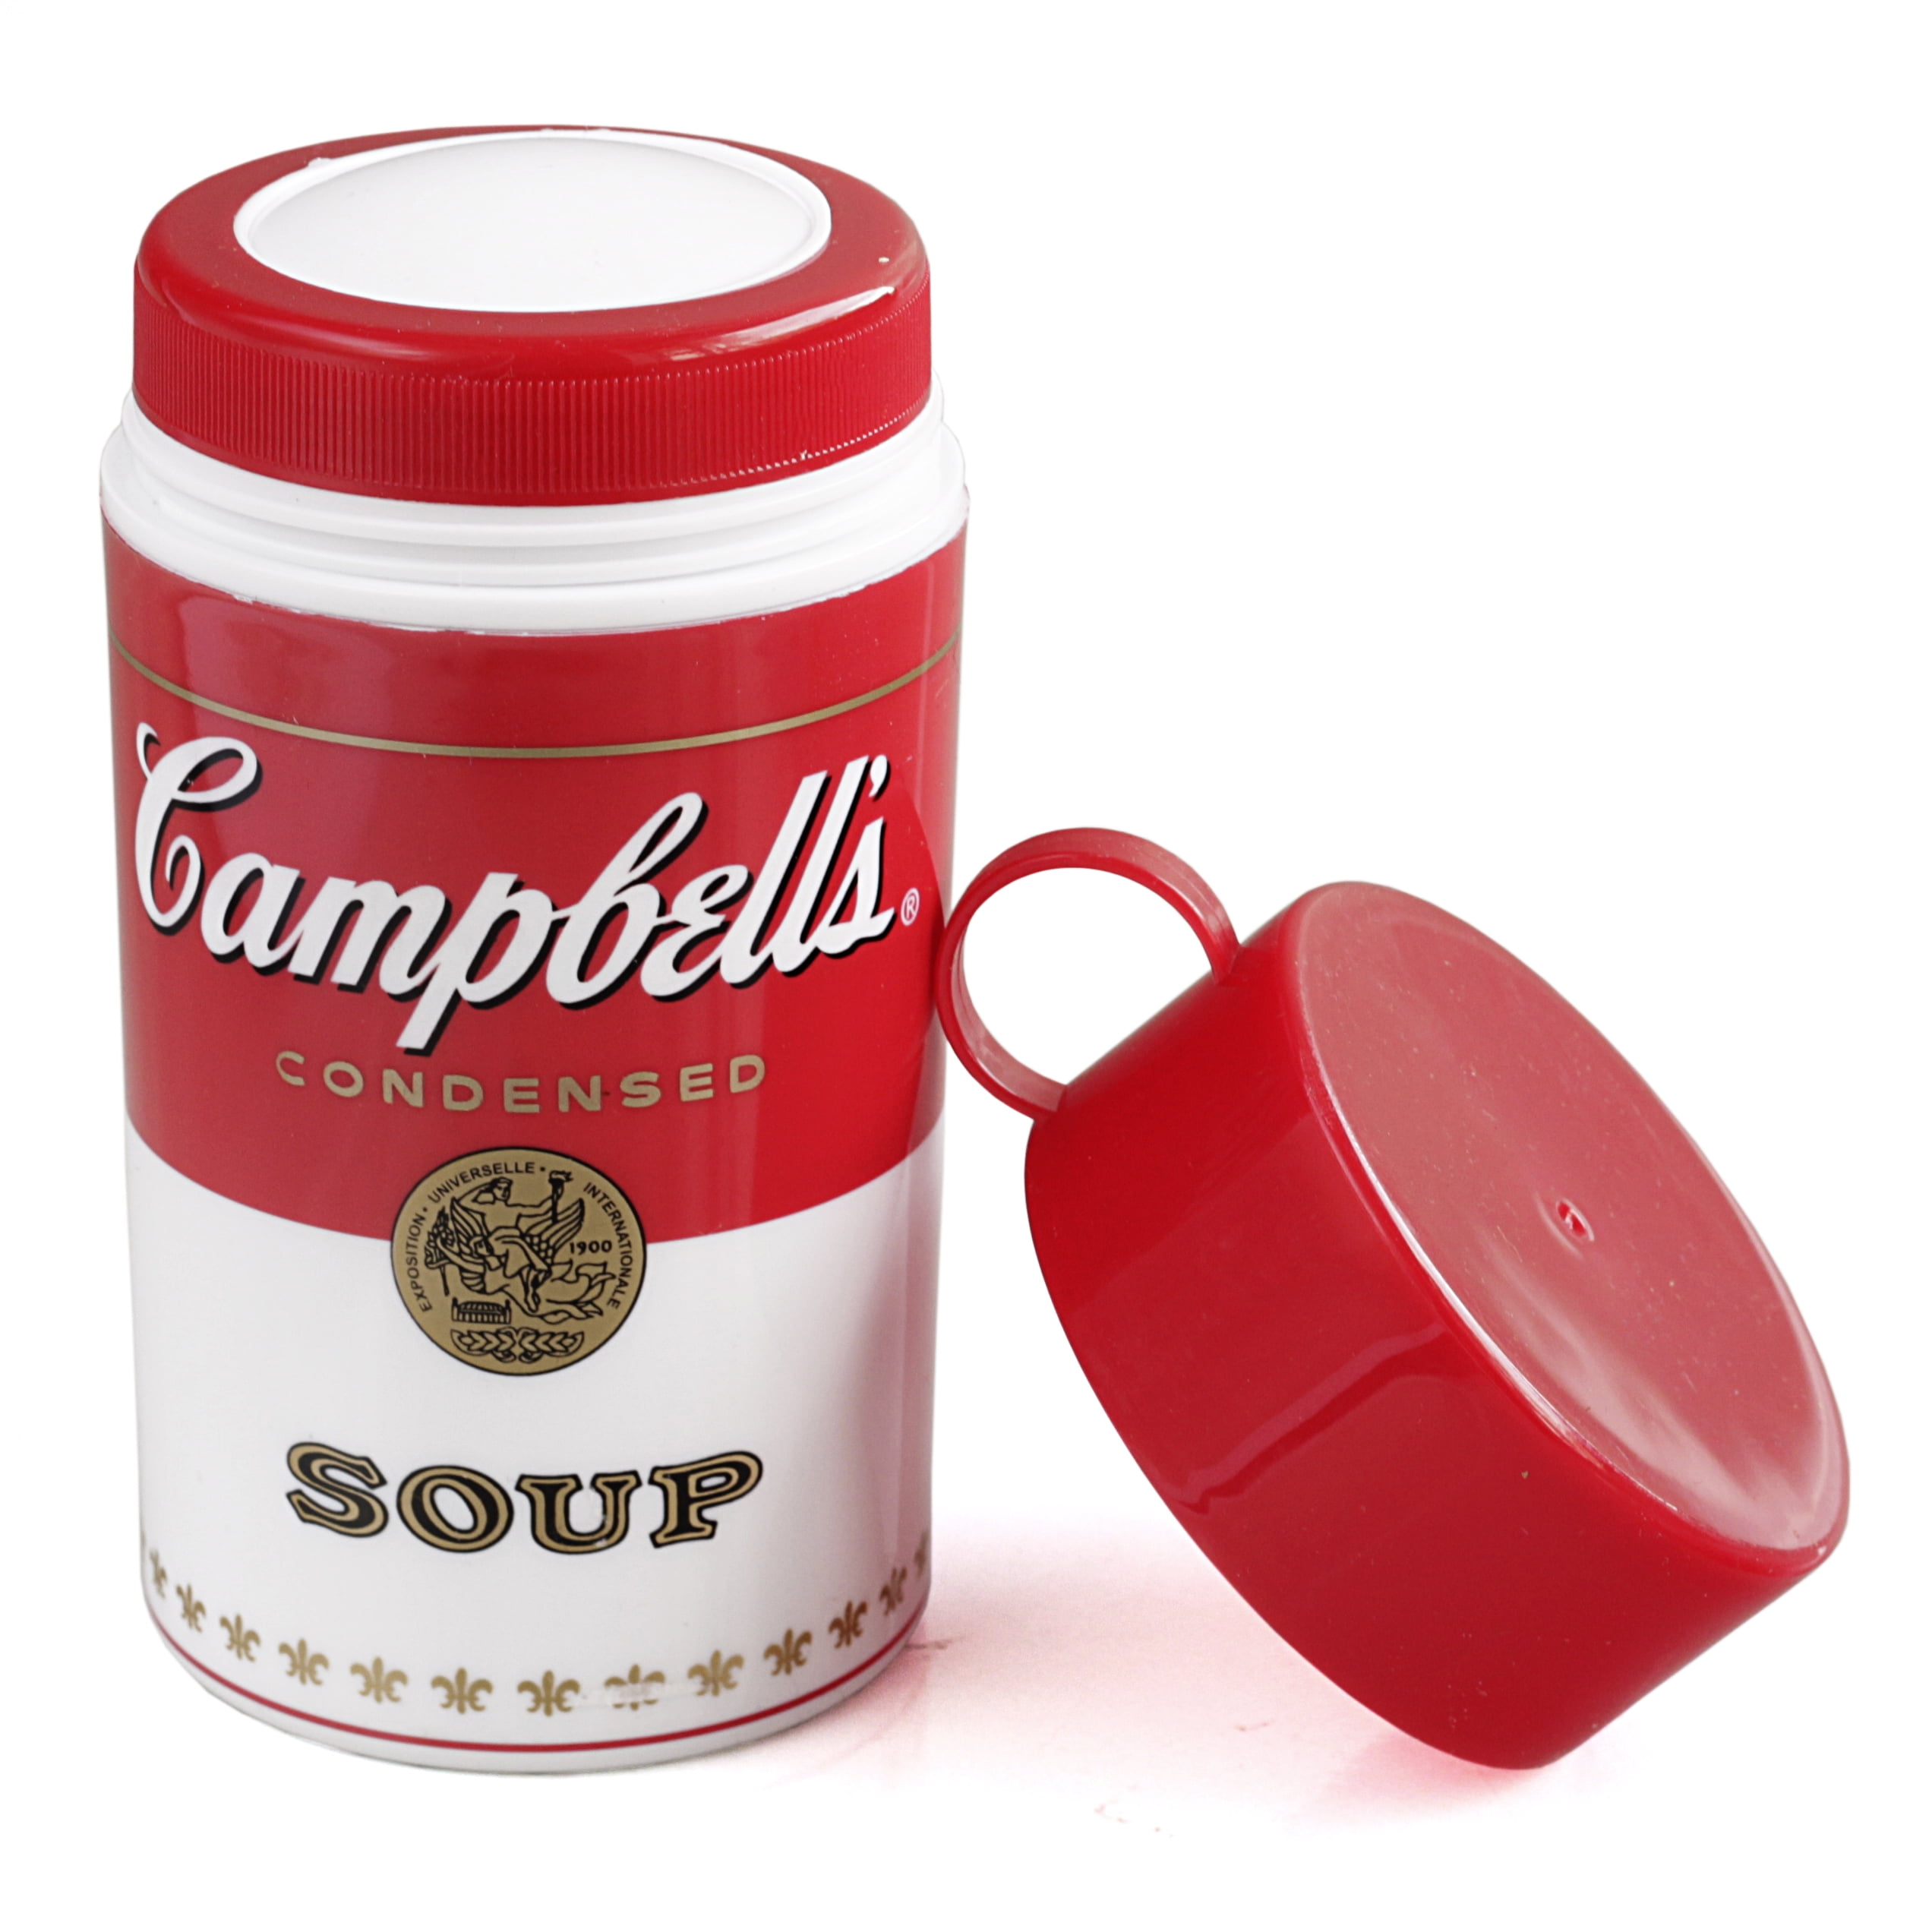 Campbell's Soup Thermos, Thermos Set, Red and White, Food Carrier,  Housewares, Campbells Brand, Collectibles 